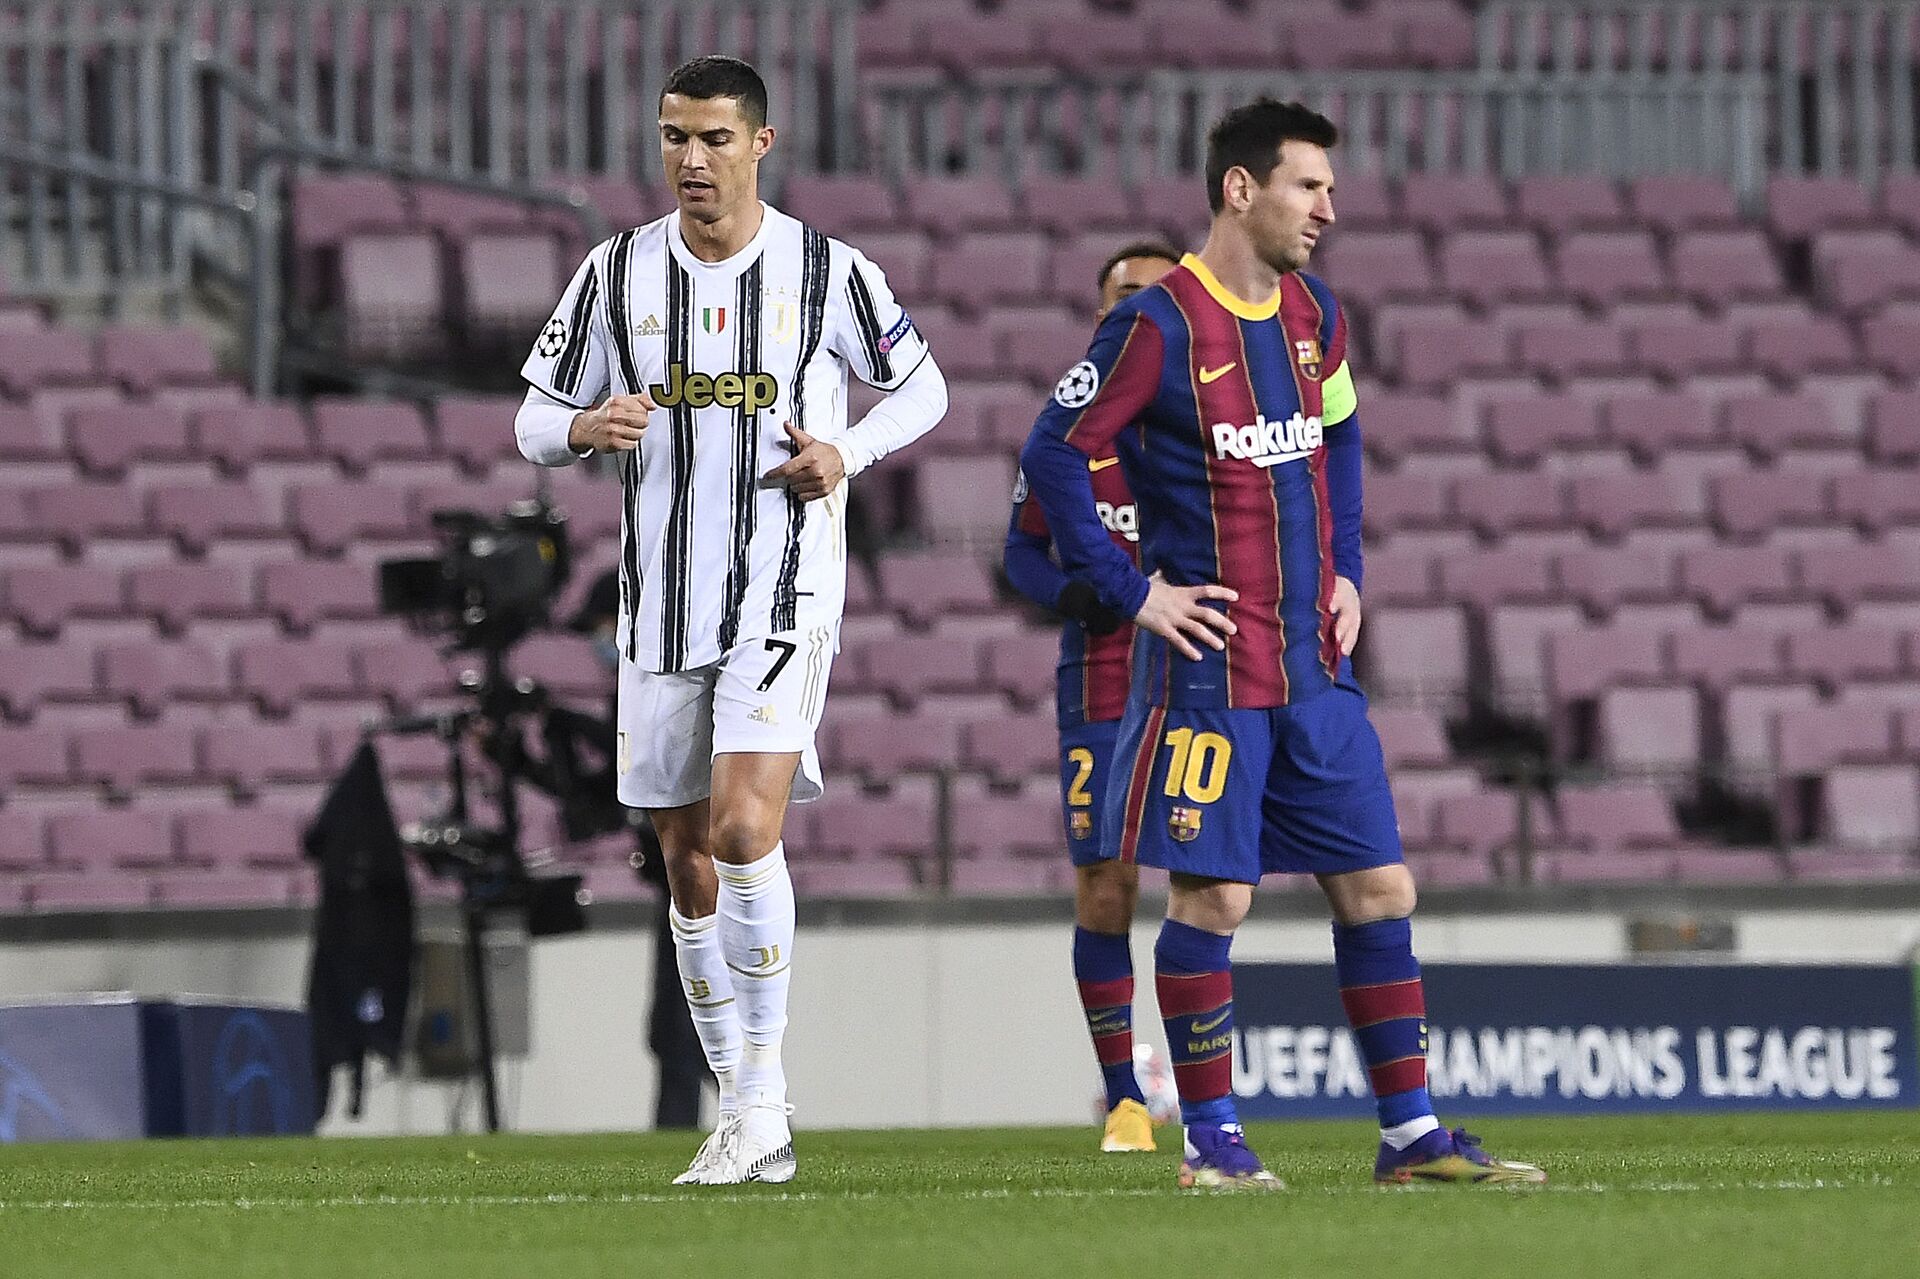 Juventus' Portuguese forward Cristiano Ronaldo (L) walks past Barcelona's Argentinian forward Lionel Messi during the UEFA Champions League group G football match between Barcelona and Juventus at the Camp Nou stadium in Barcelona on December 8, 2020 - Sputnik International, 1920, 07.09.2021